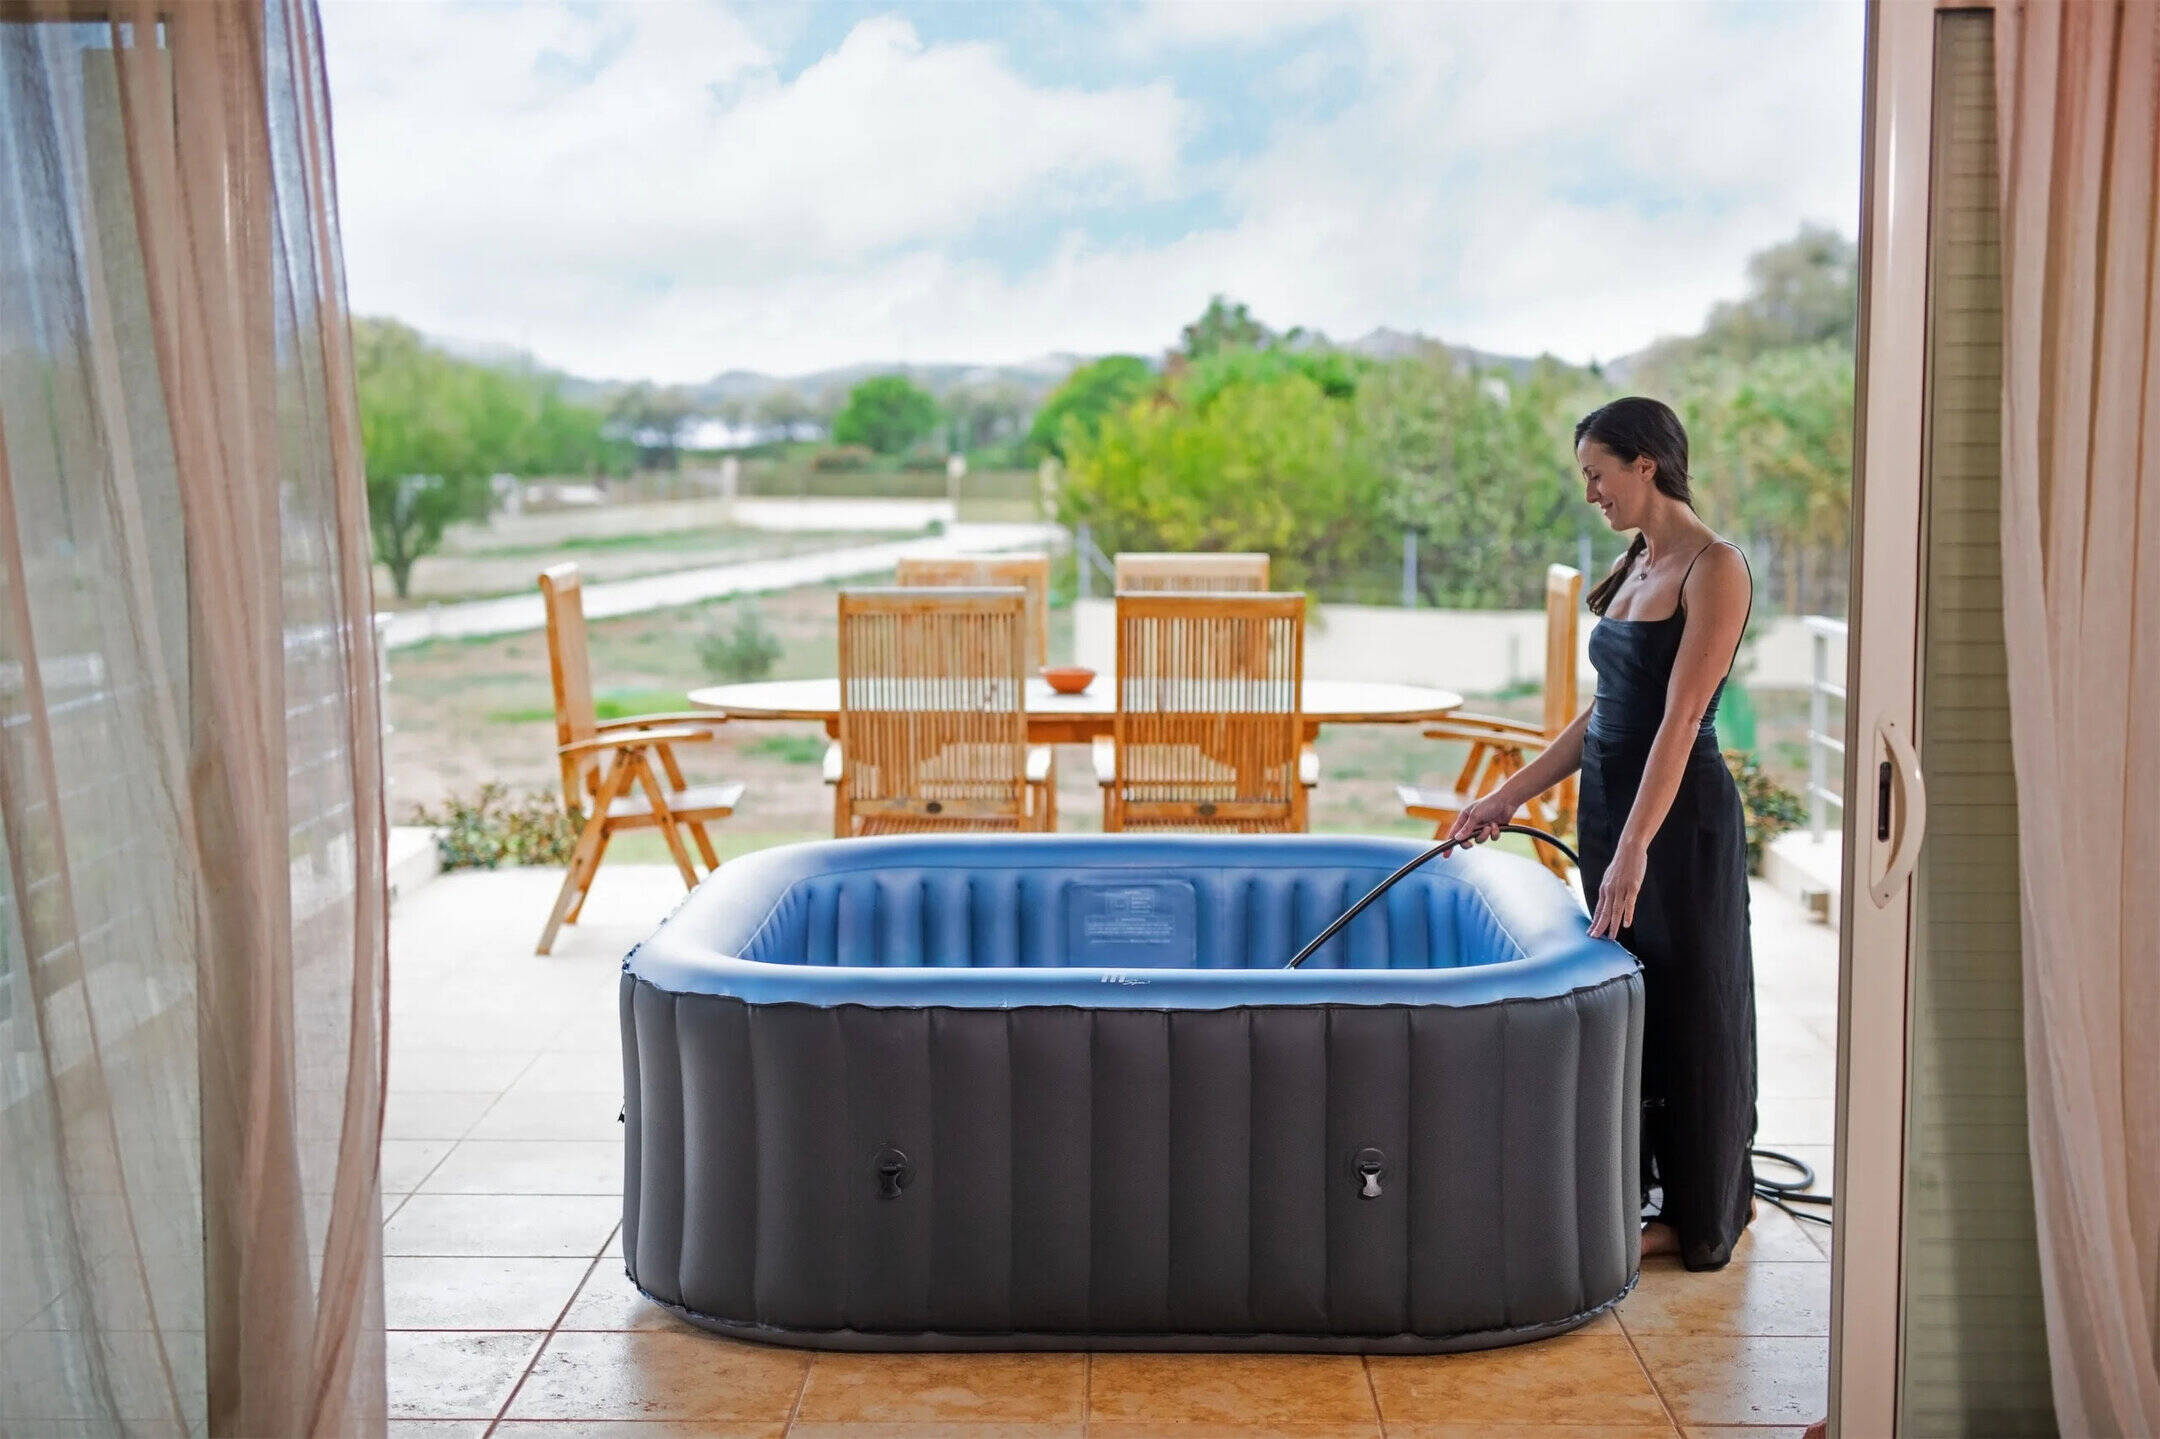 How Often To Change Water In Inflatable Hot Tub